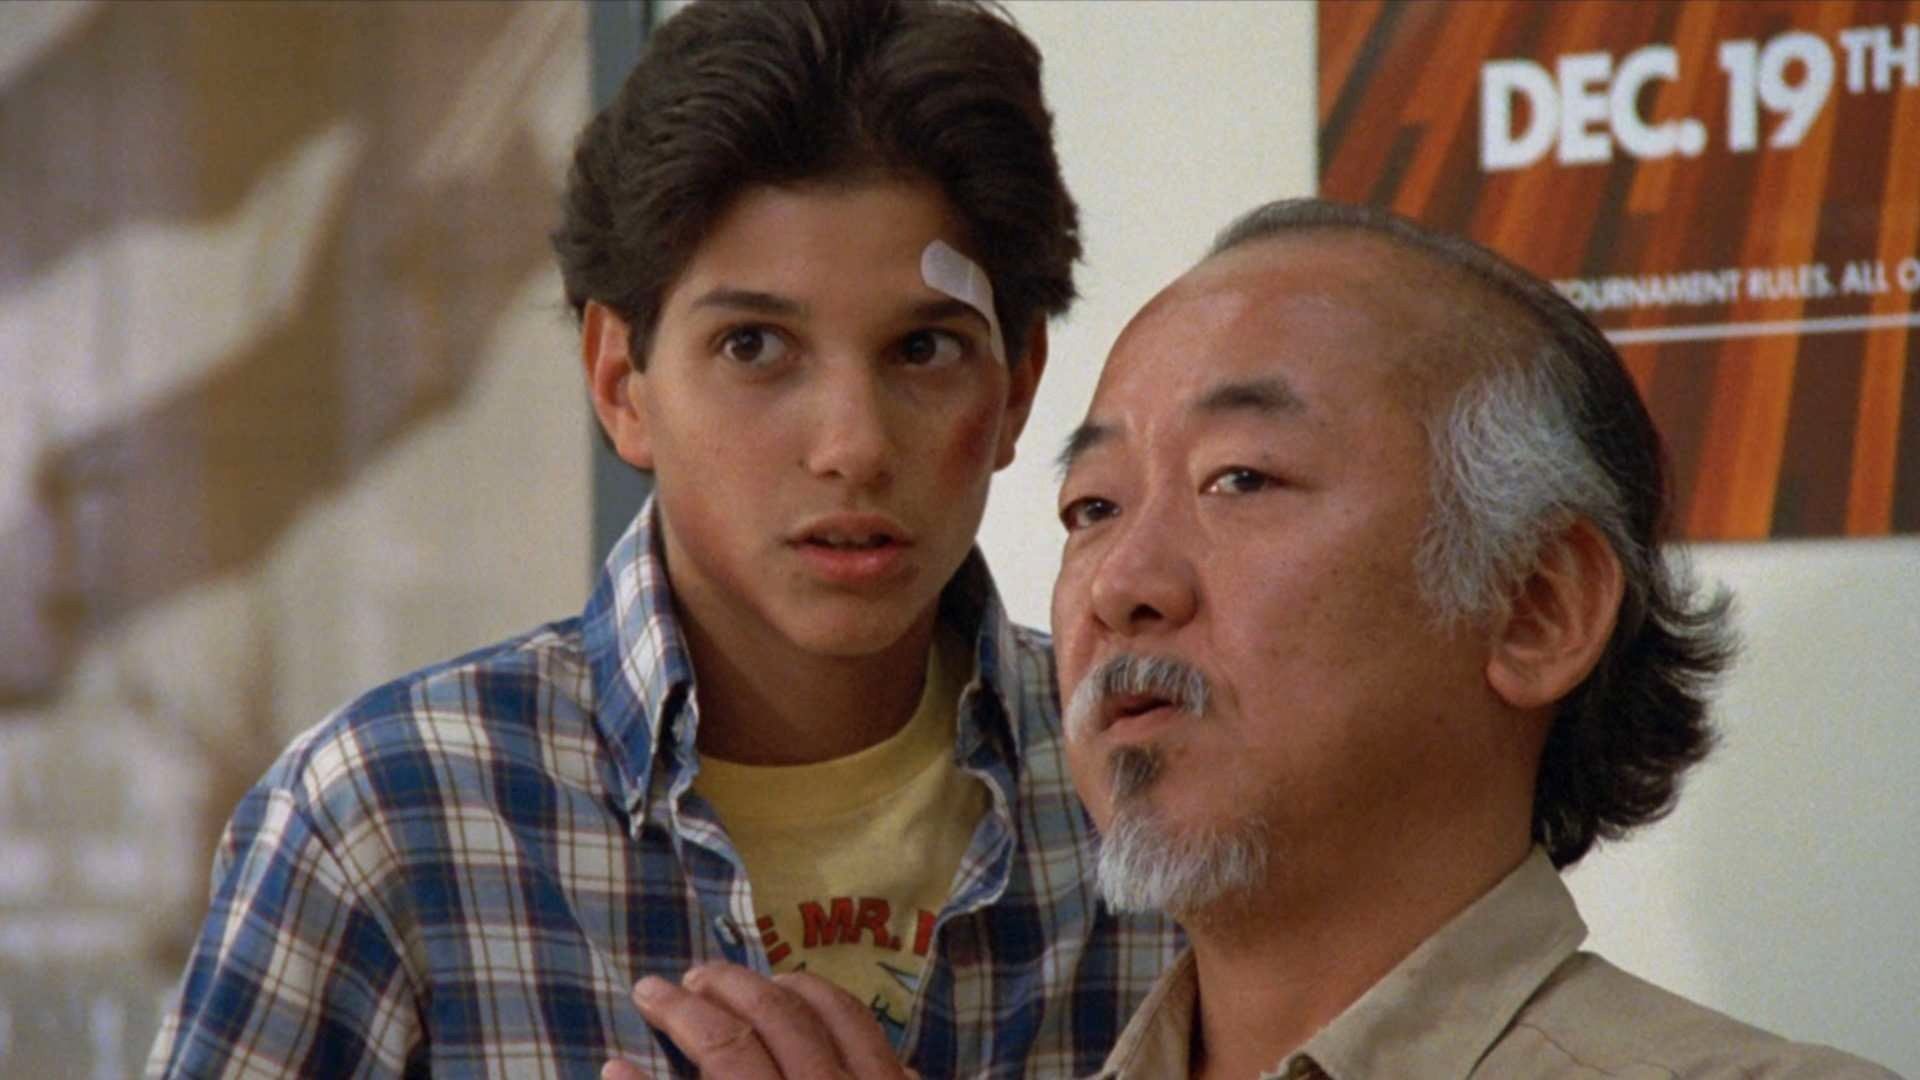 What The Karate Kid cast looks like today